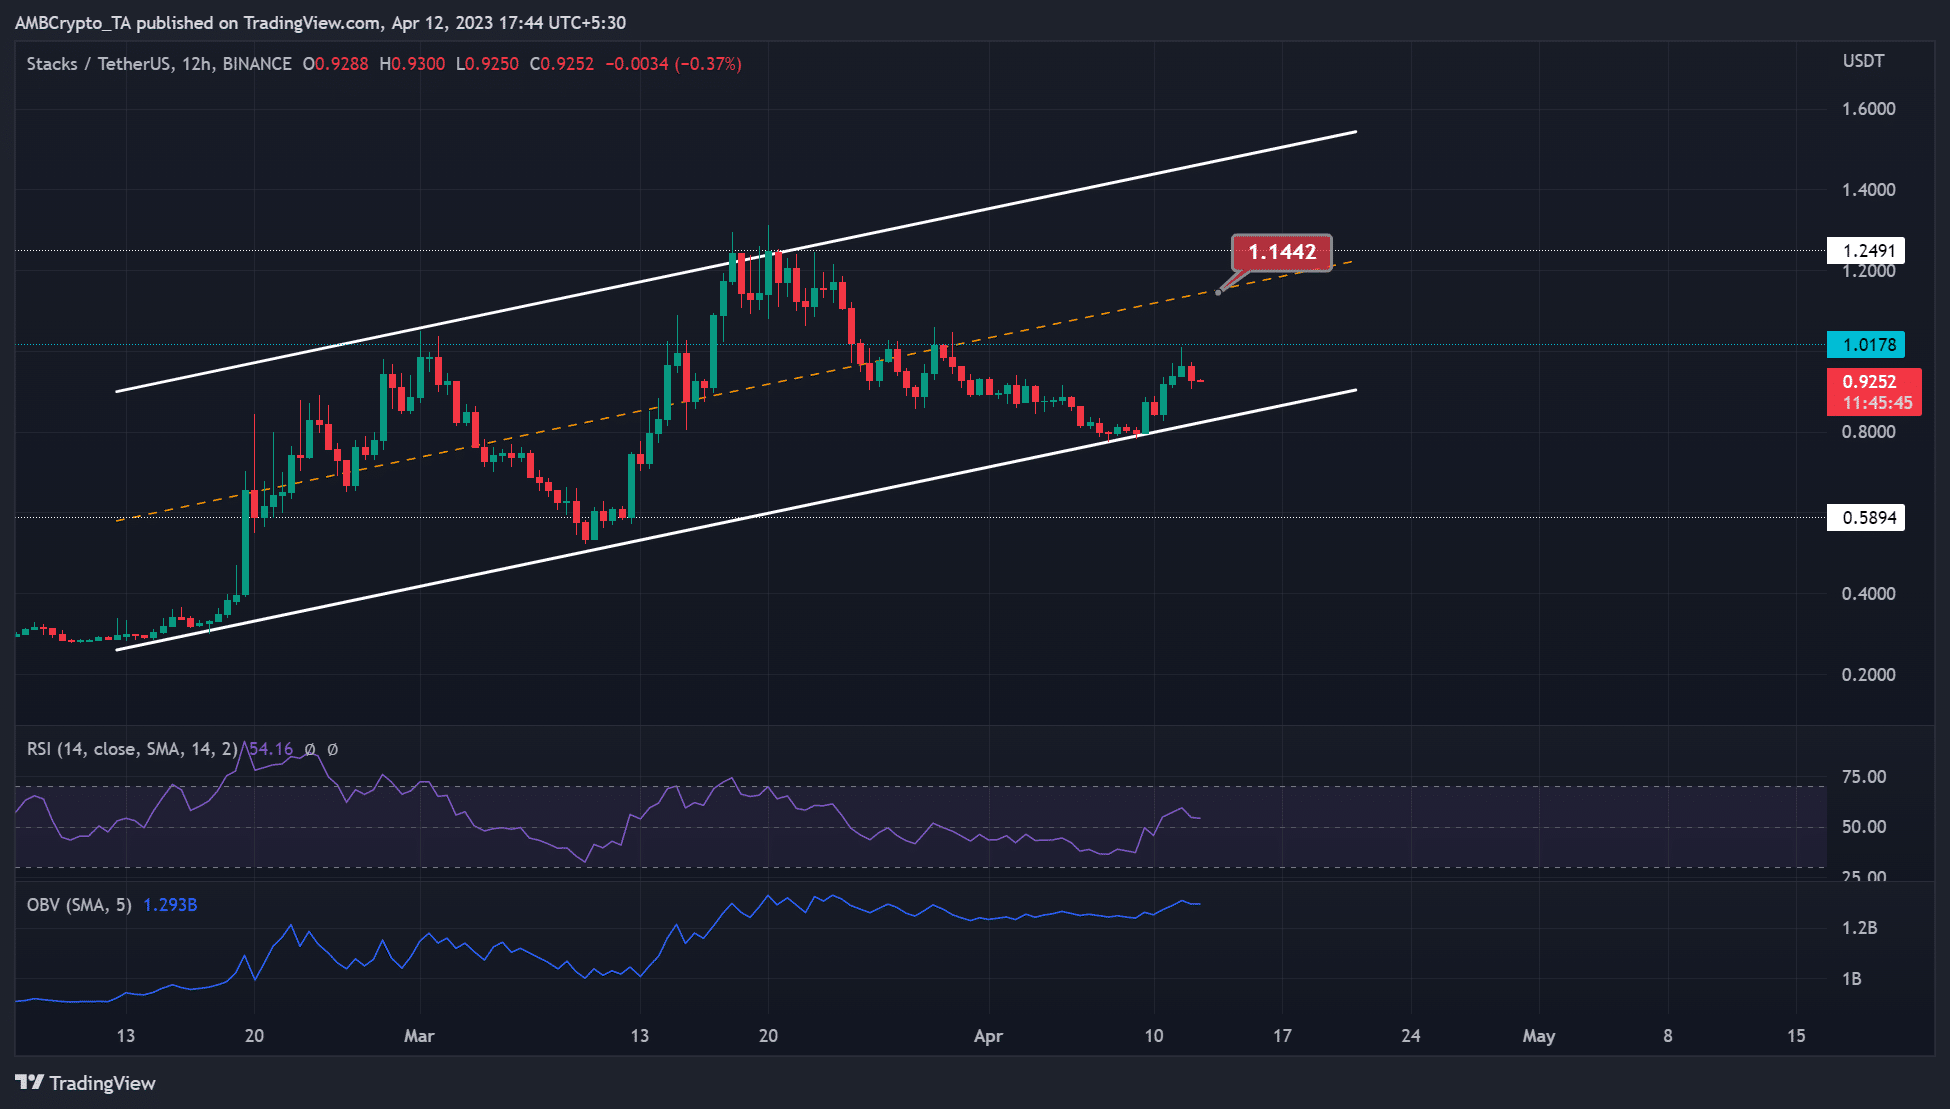 VeChain [VET] fixated on the $0.02695 target – Is it feasible?